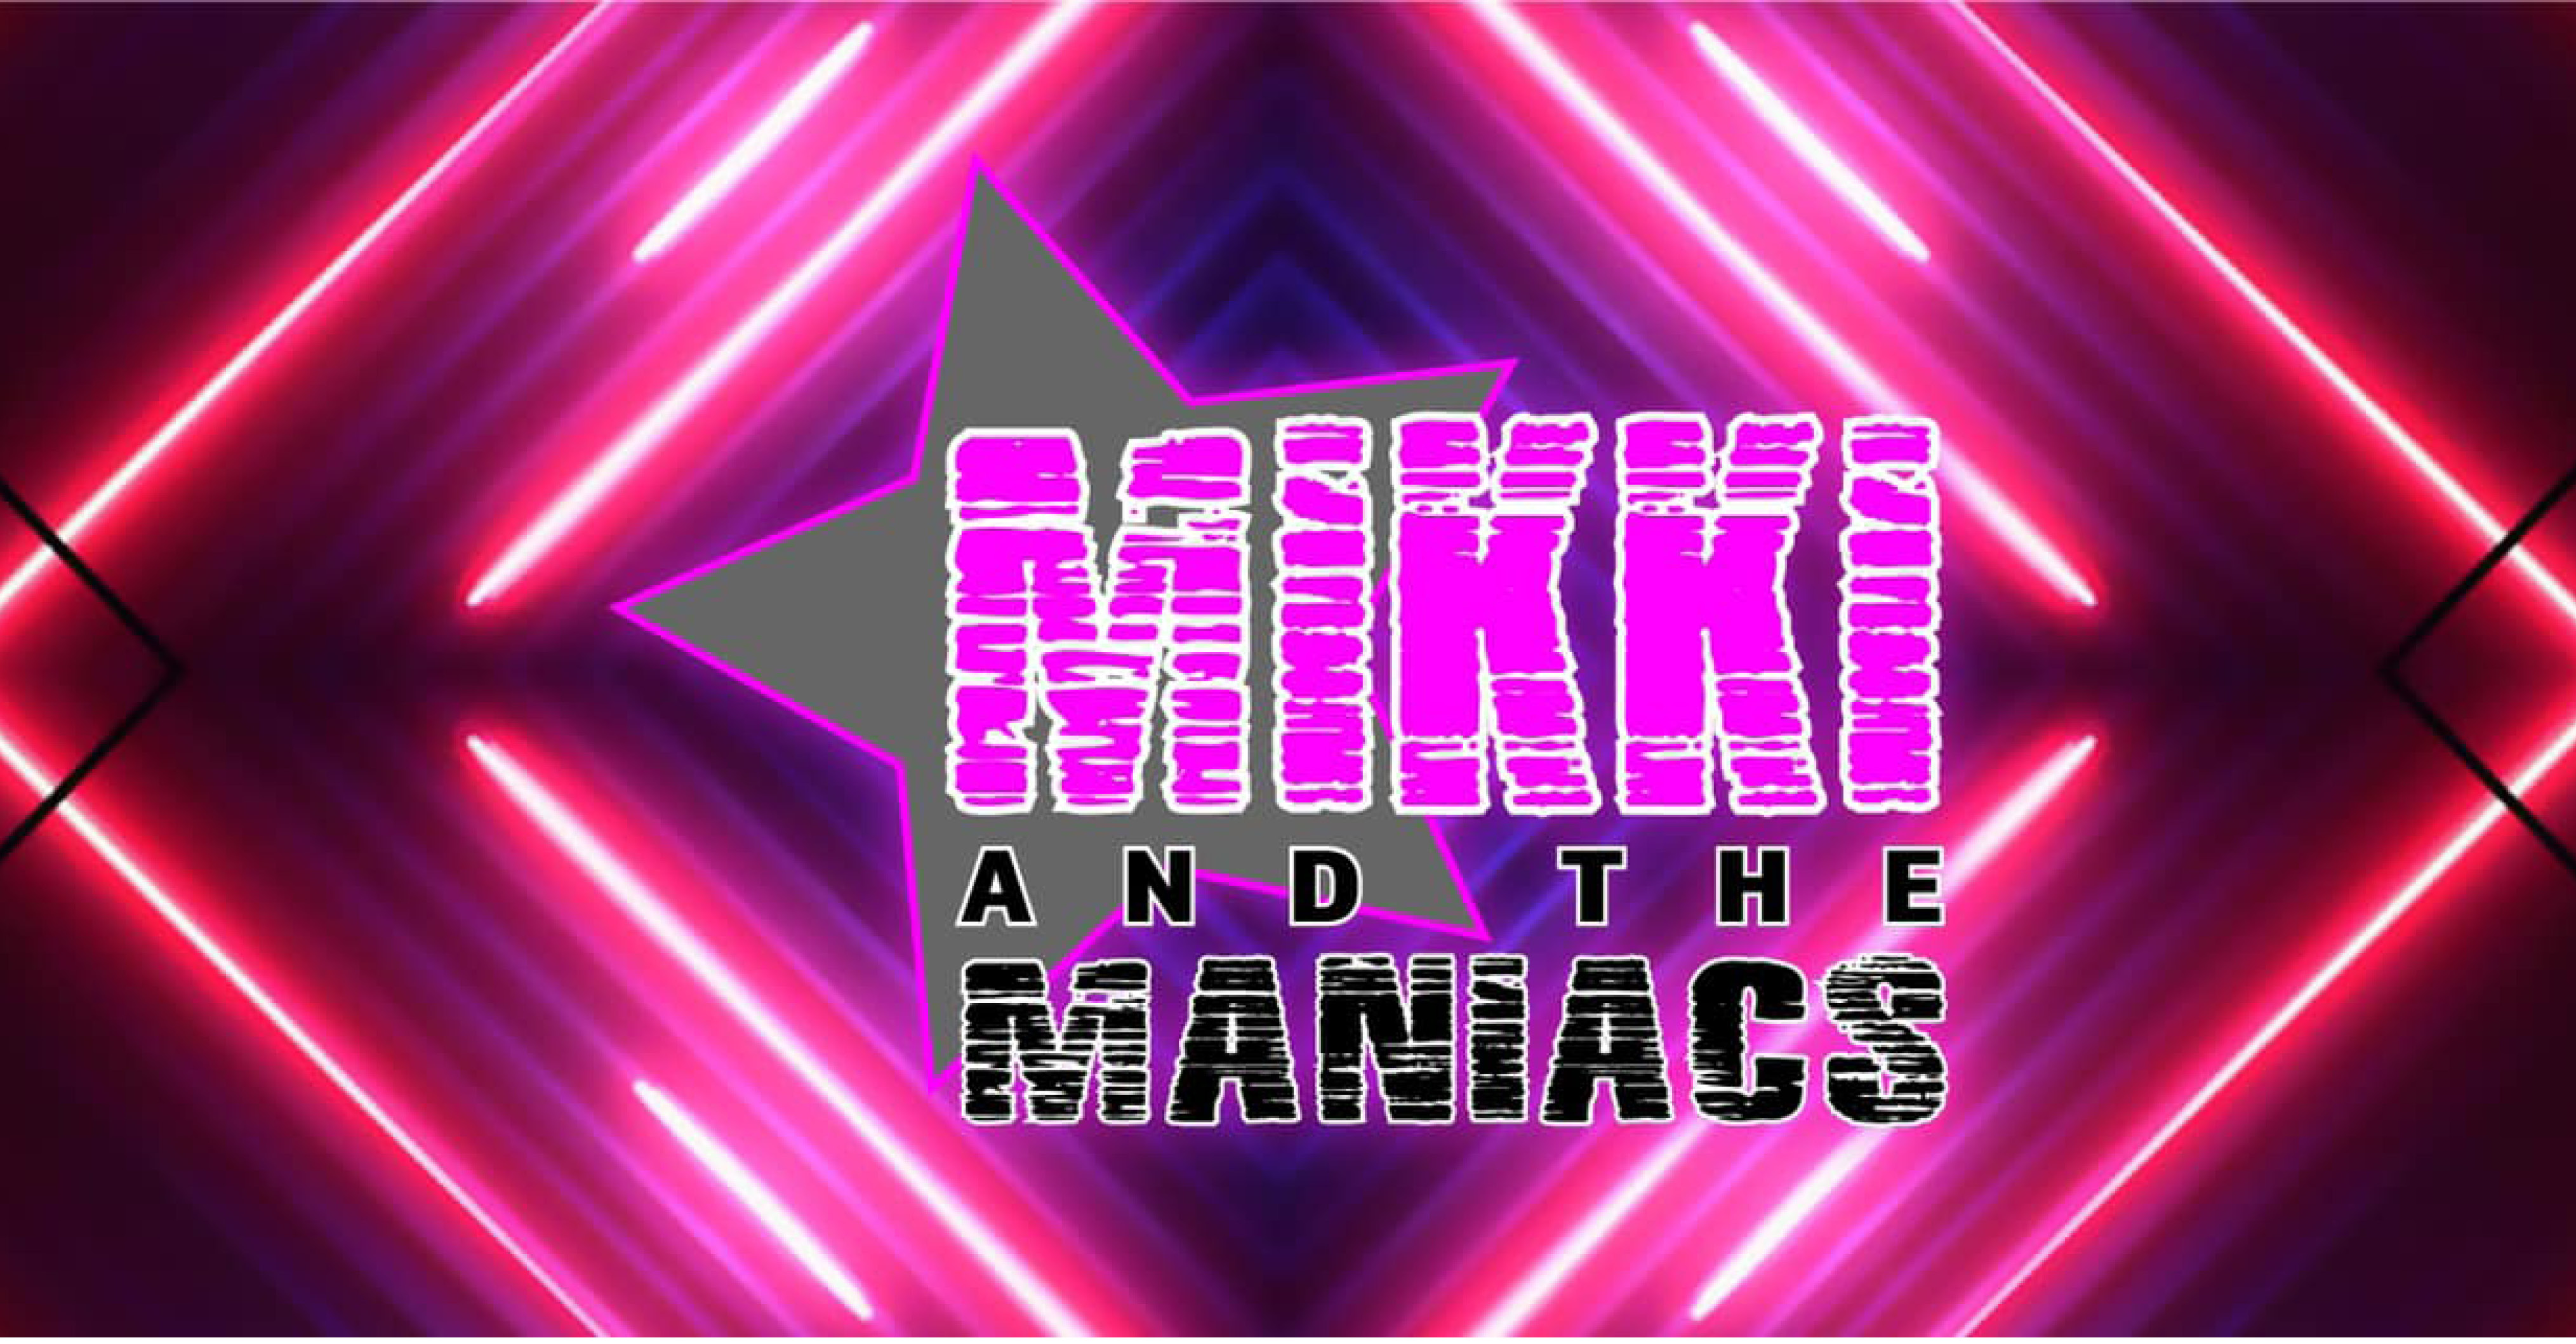 Mikki and the Maniacs